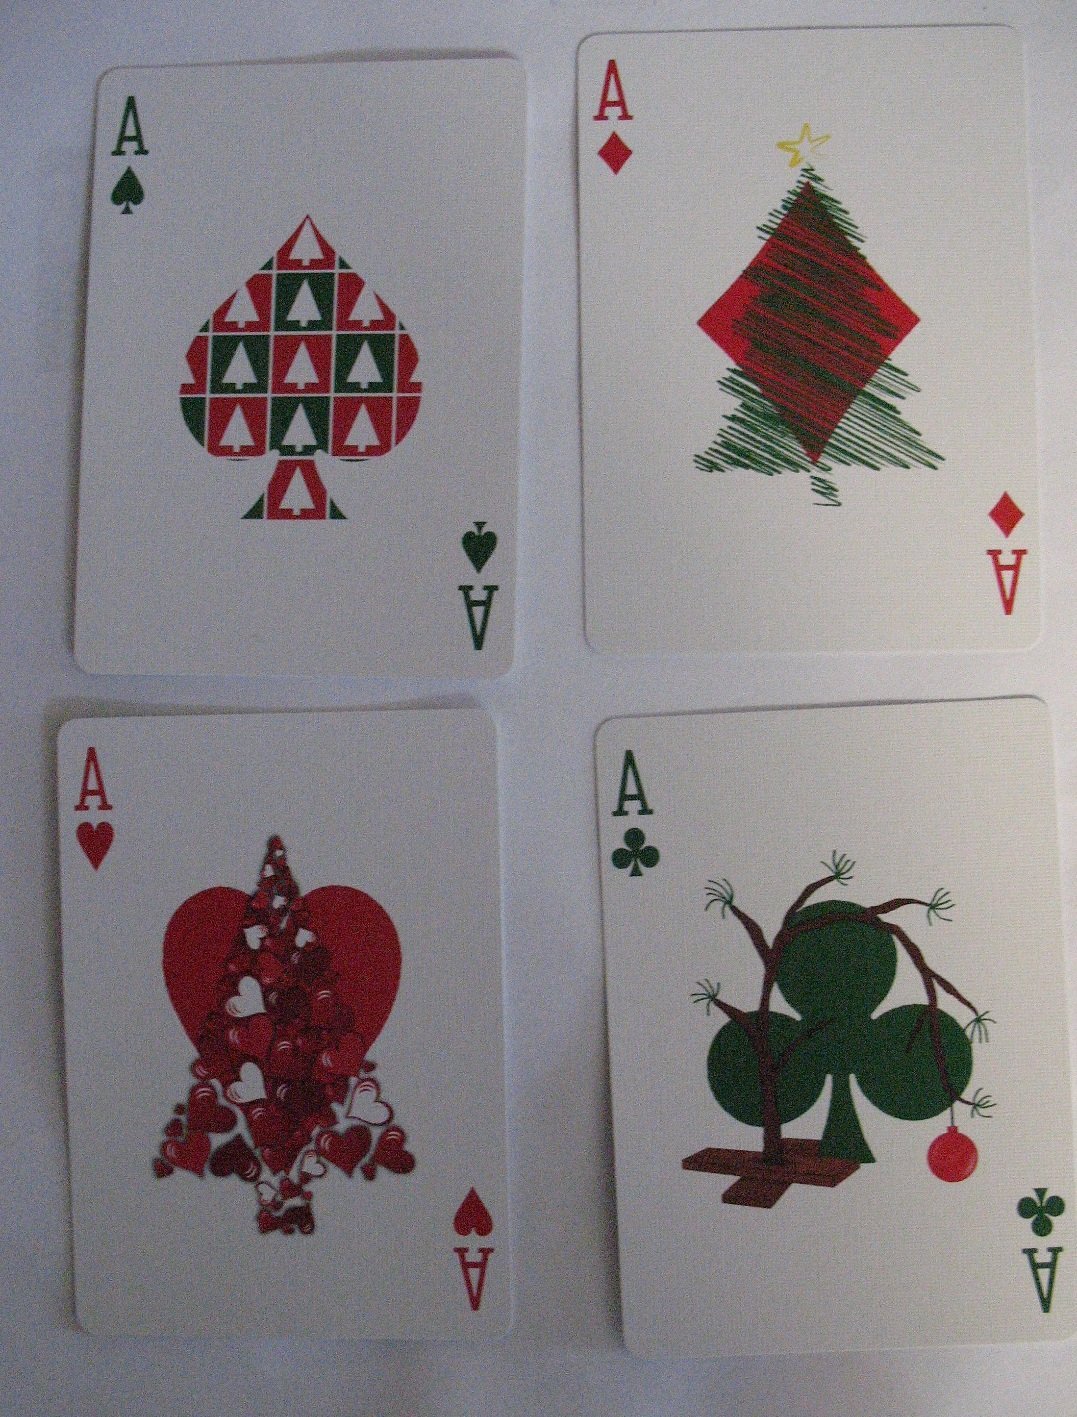 1 deck Bicycle 245 Green Deck Red Santa Maiden Back Playing Cards Christmas Tree 